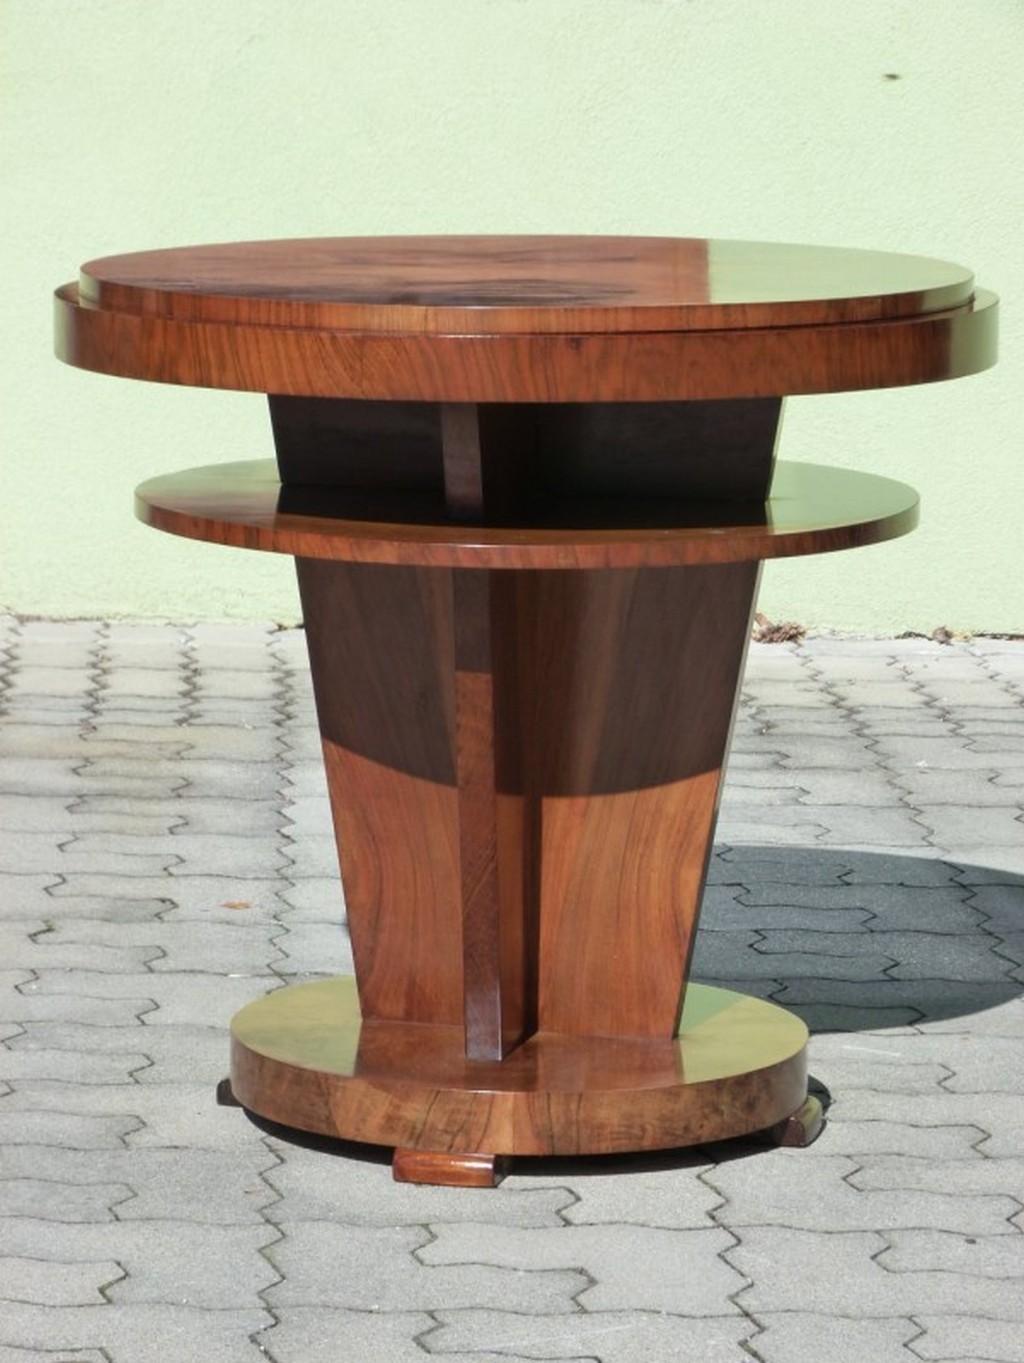 Cubist Art Deco walnut side table. Professionally stained and repolished.